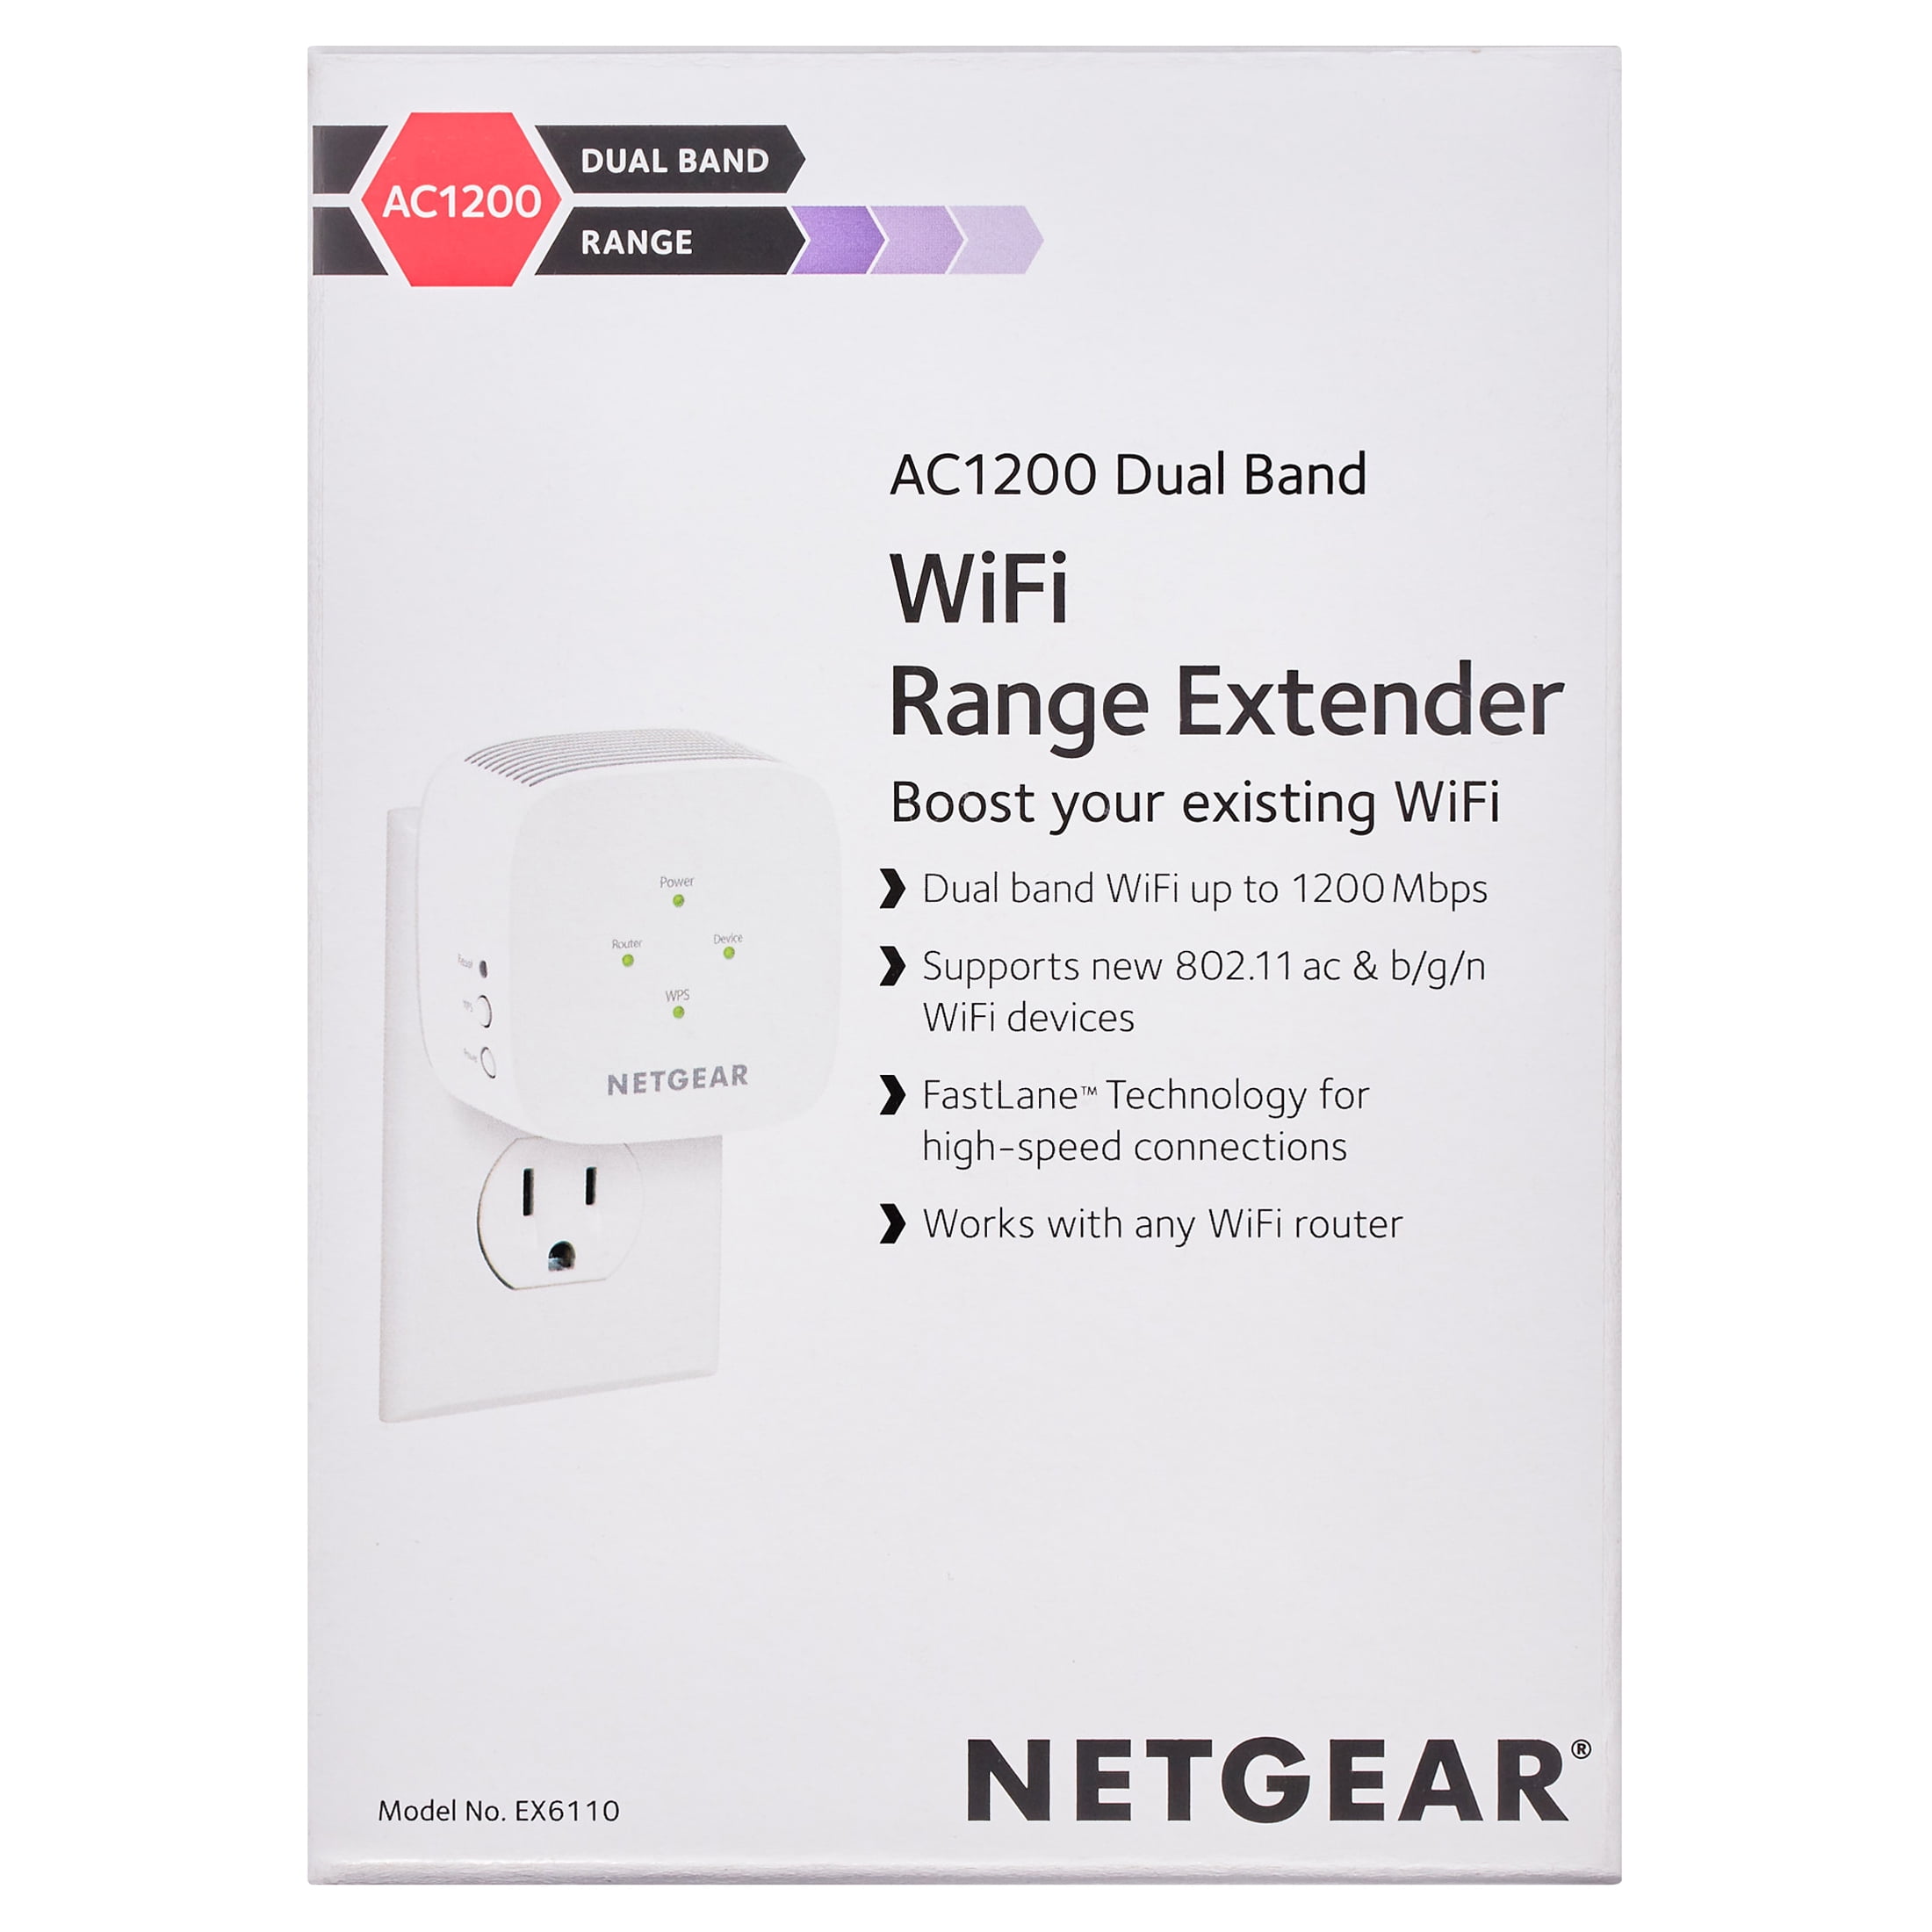 Netgear Powerline 1200 review: Top power line speed at a low cost